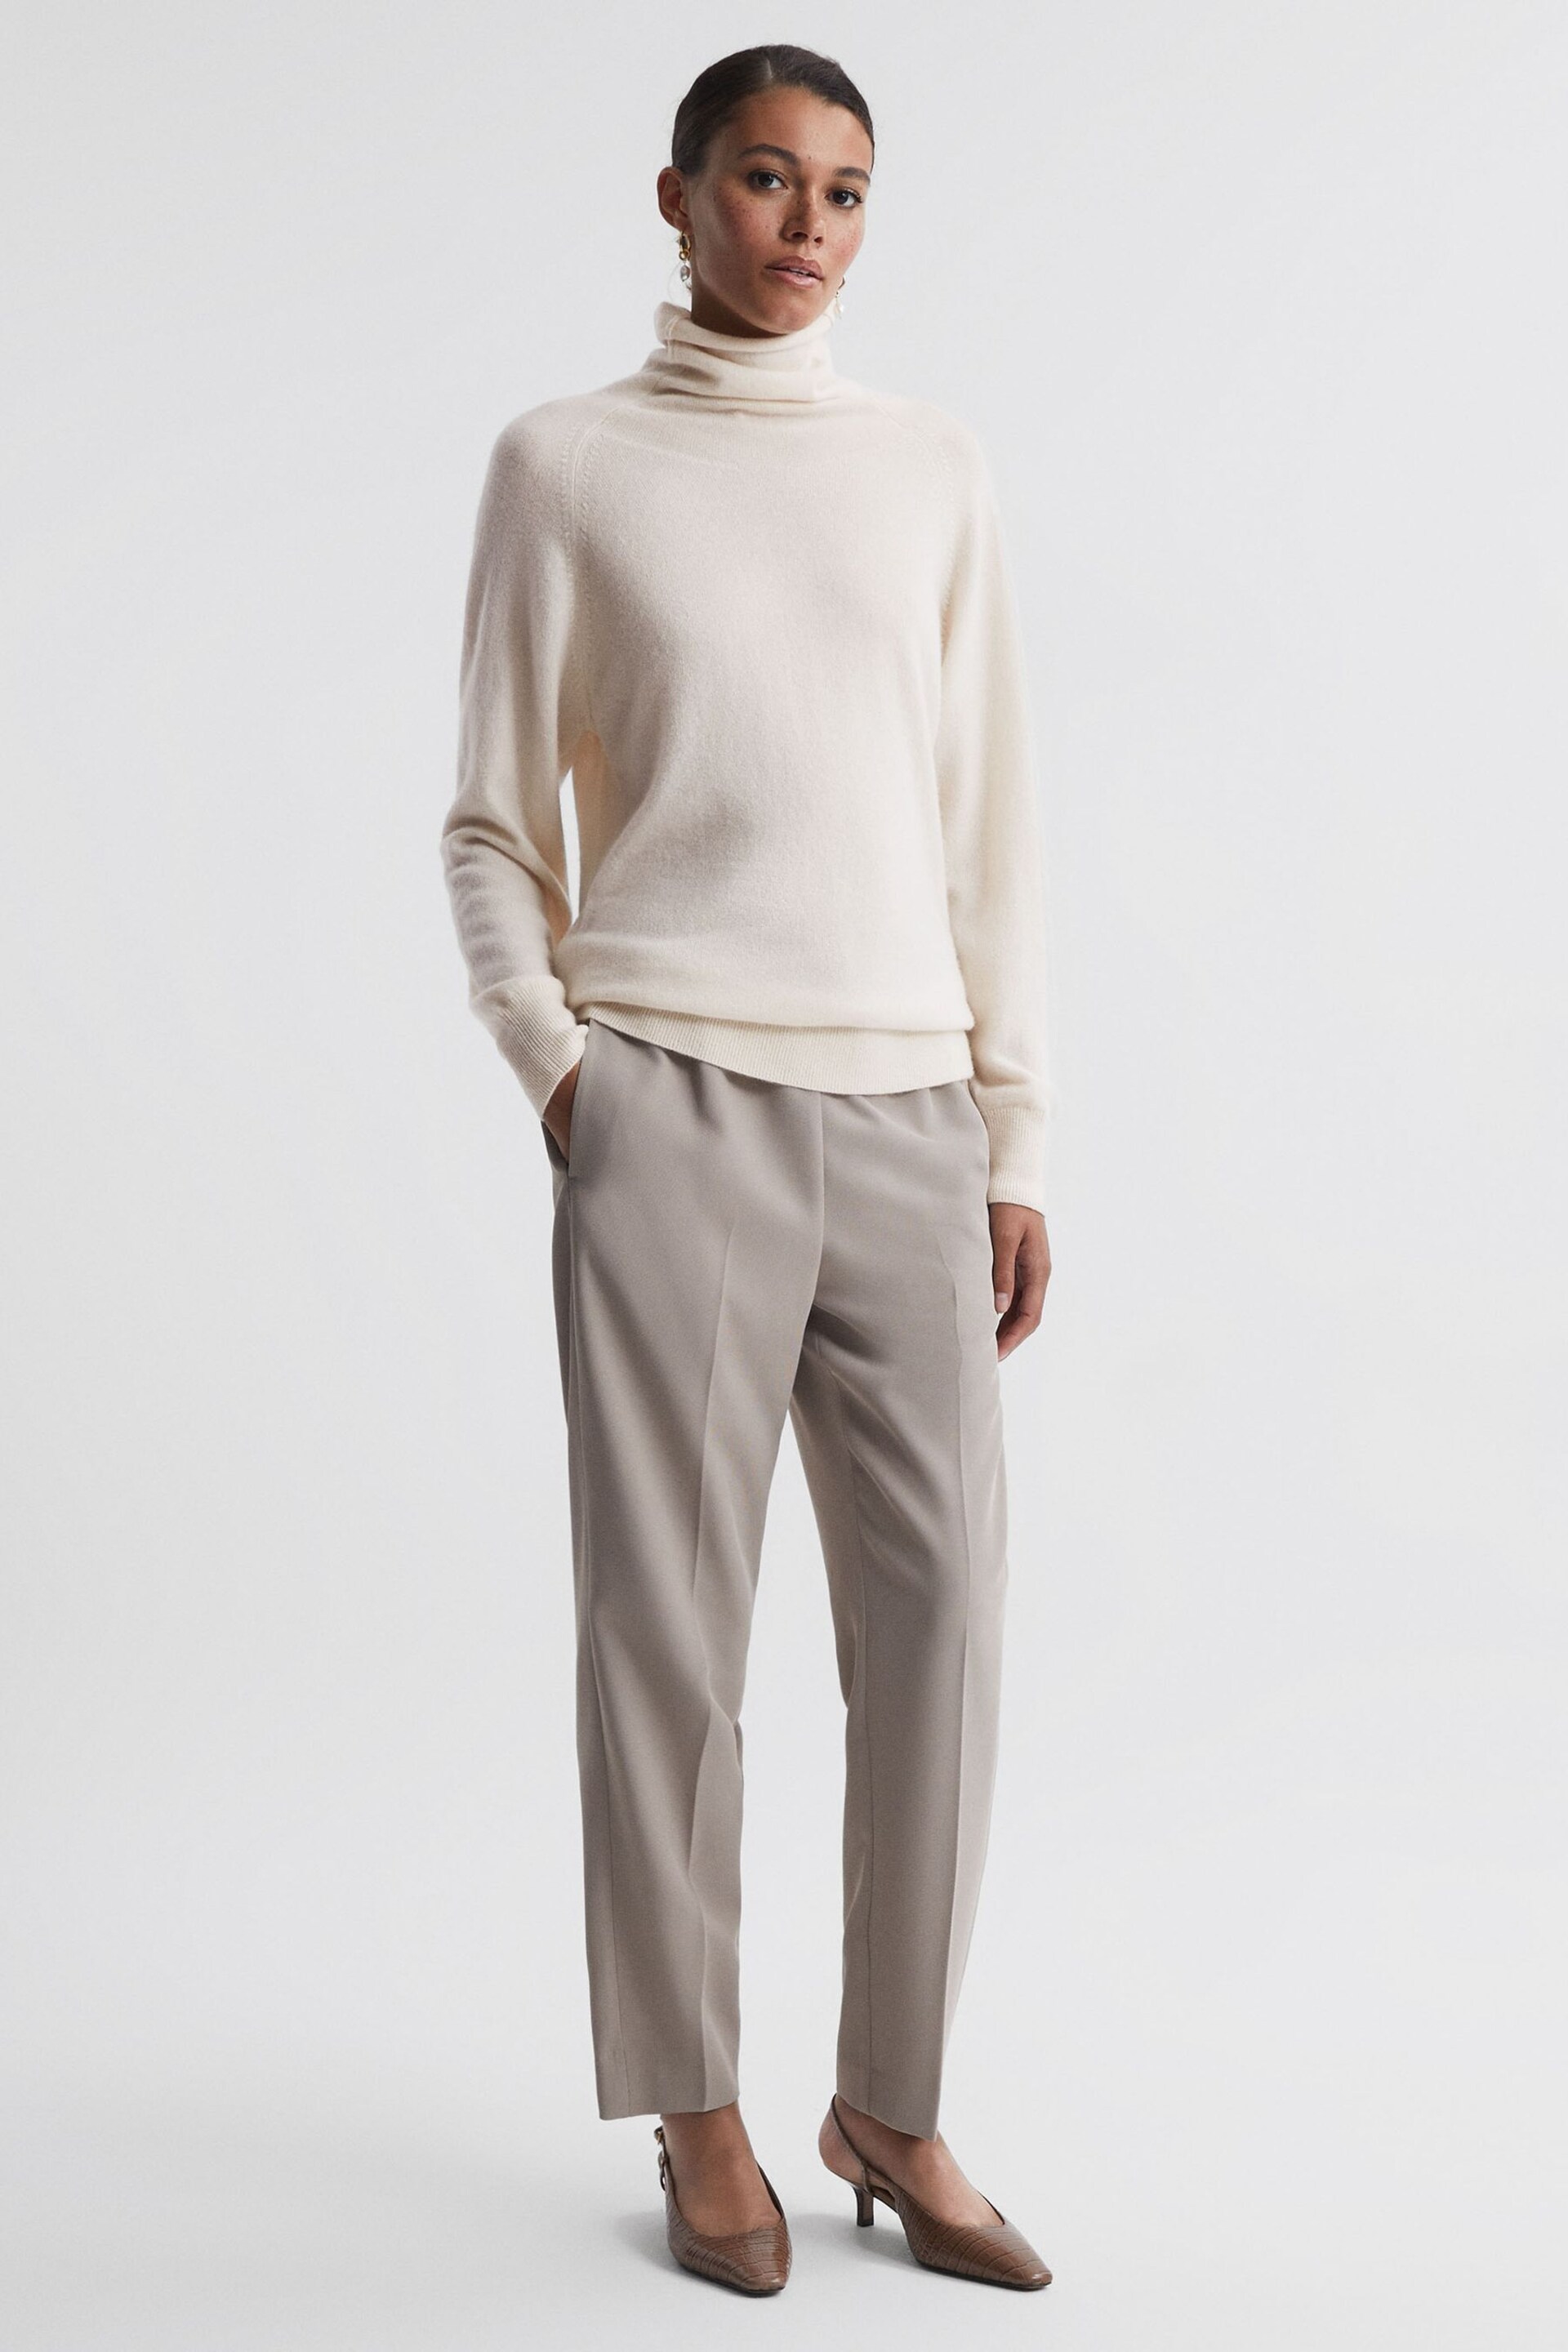 Reiss Cream Florence Relaxed Cashmere Roll Neck Top - Image 6 of 7